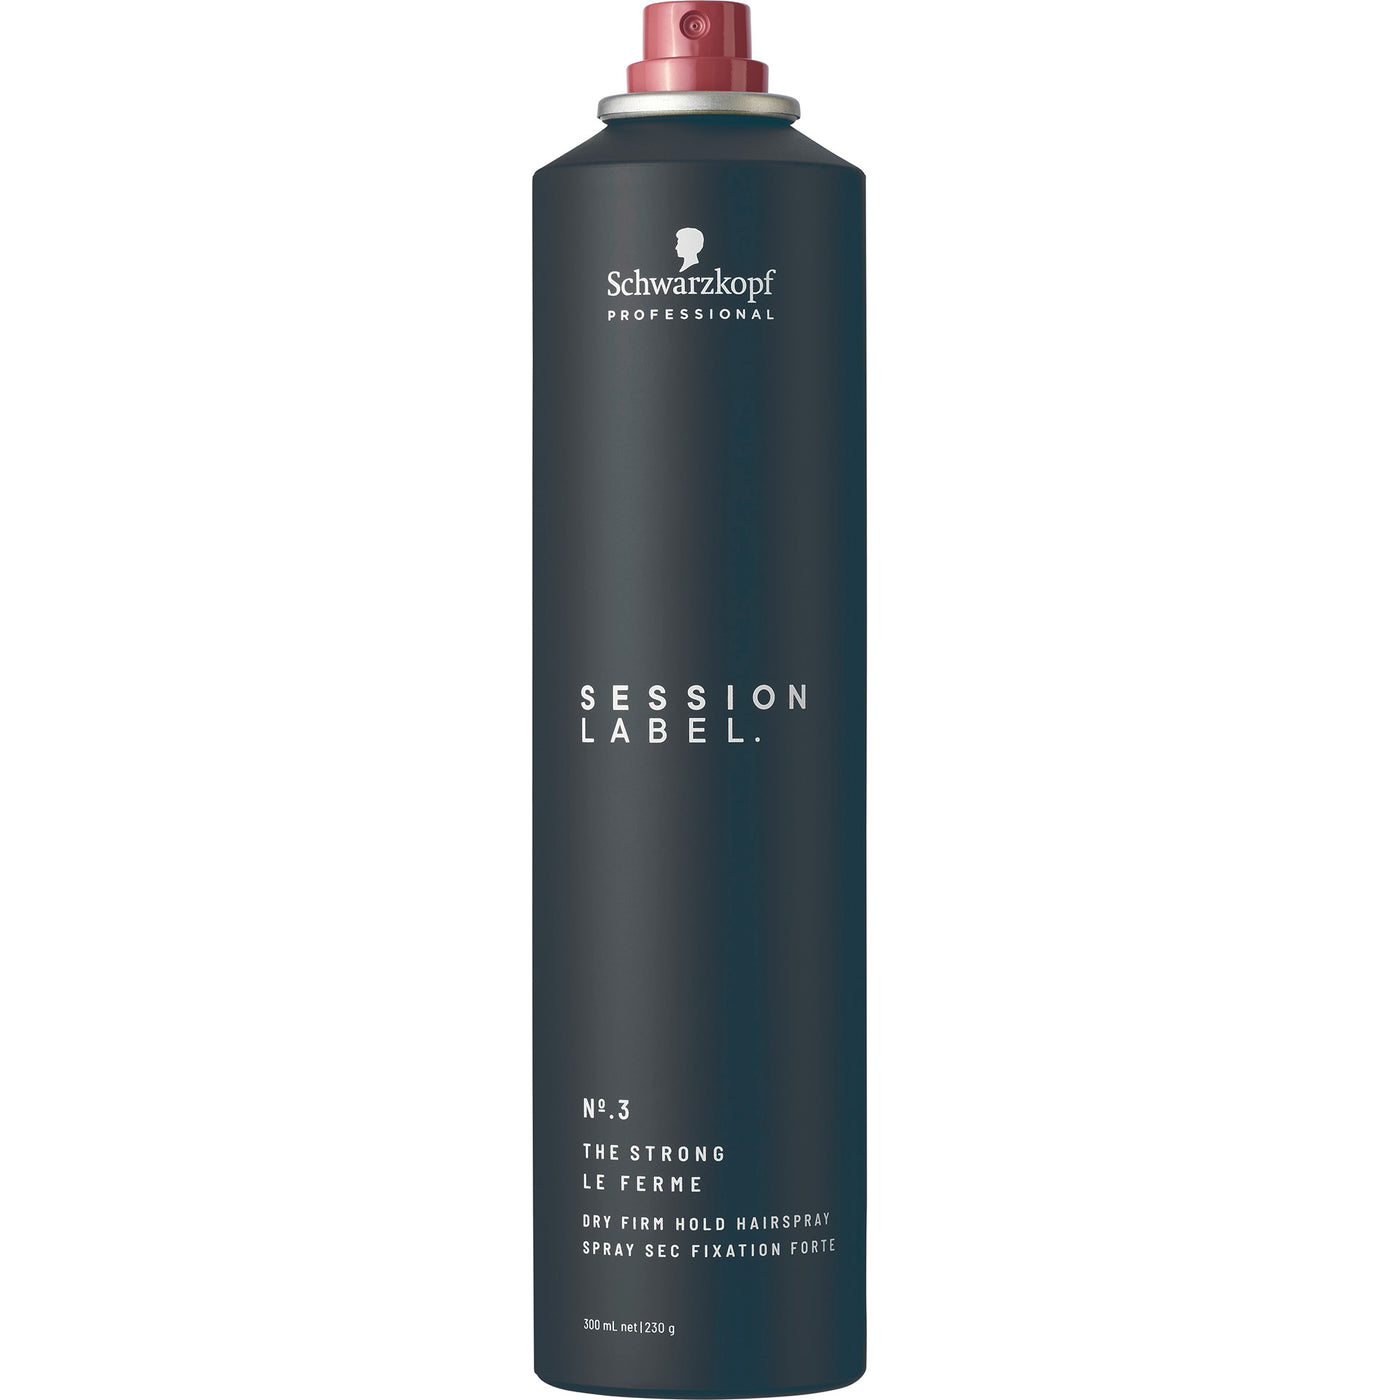 Schwarzkopf Professional Session Label The Strong (300ml) cap off